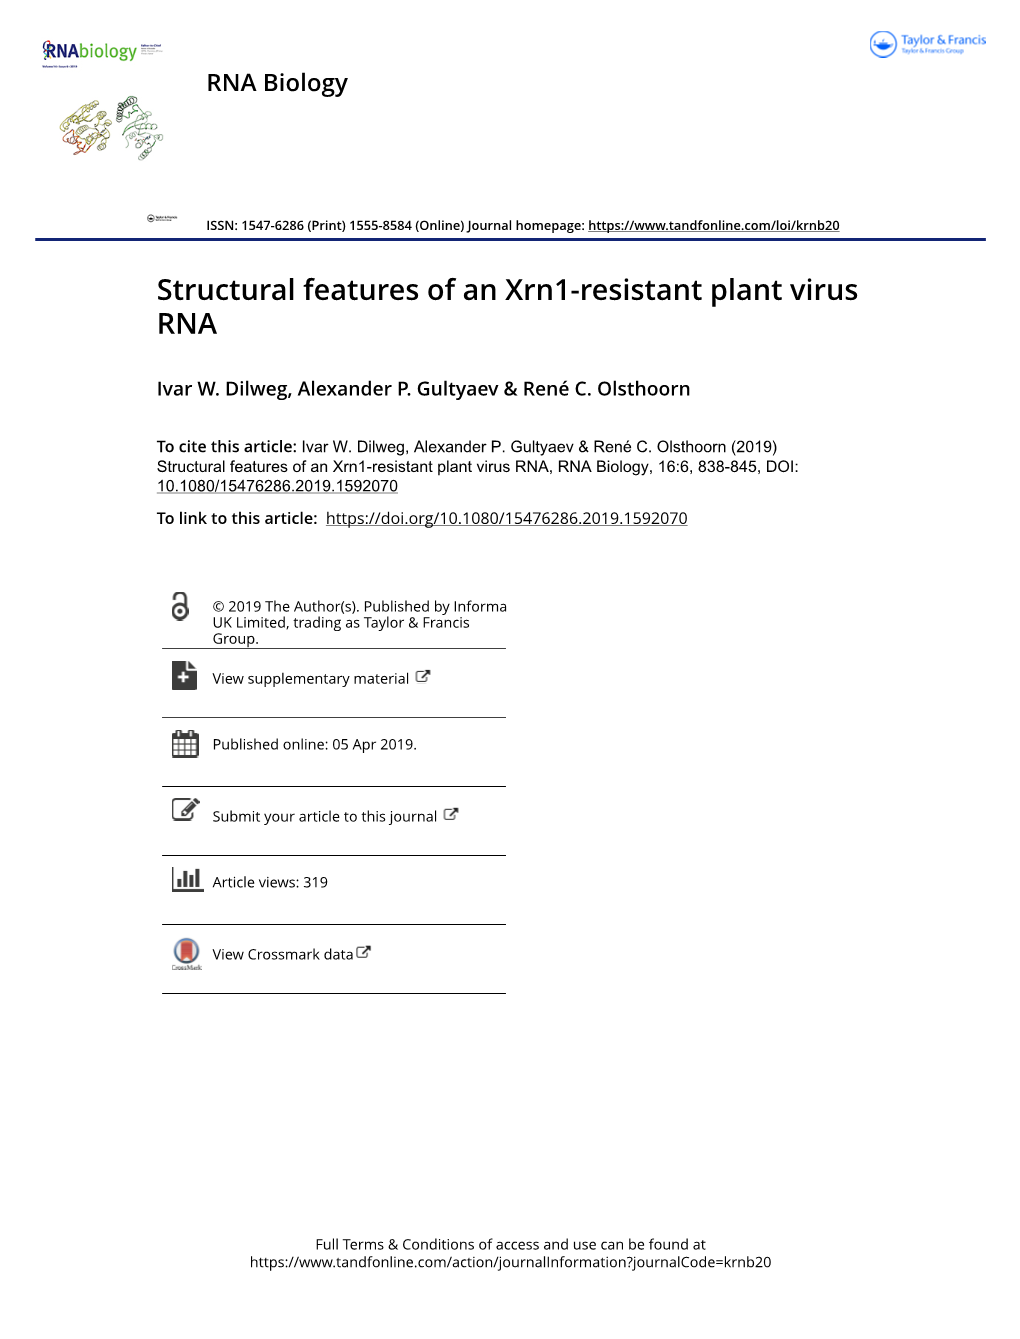 Structural Features of an Xrn1-Resistant Plant Virus RNA